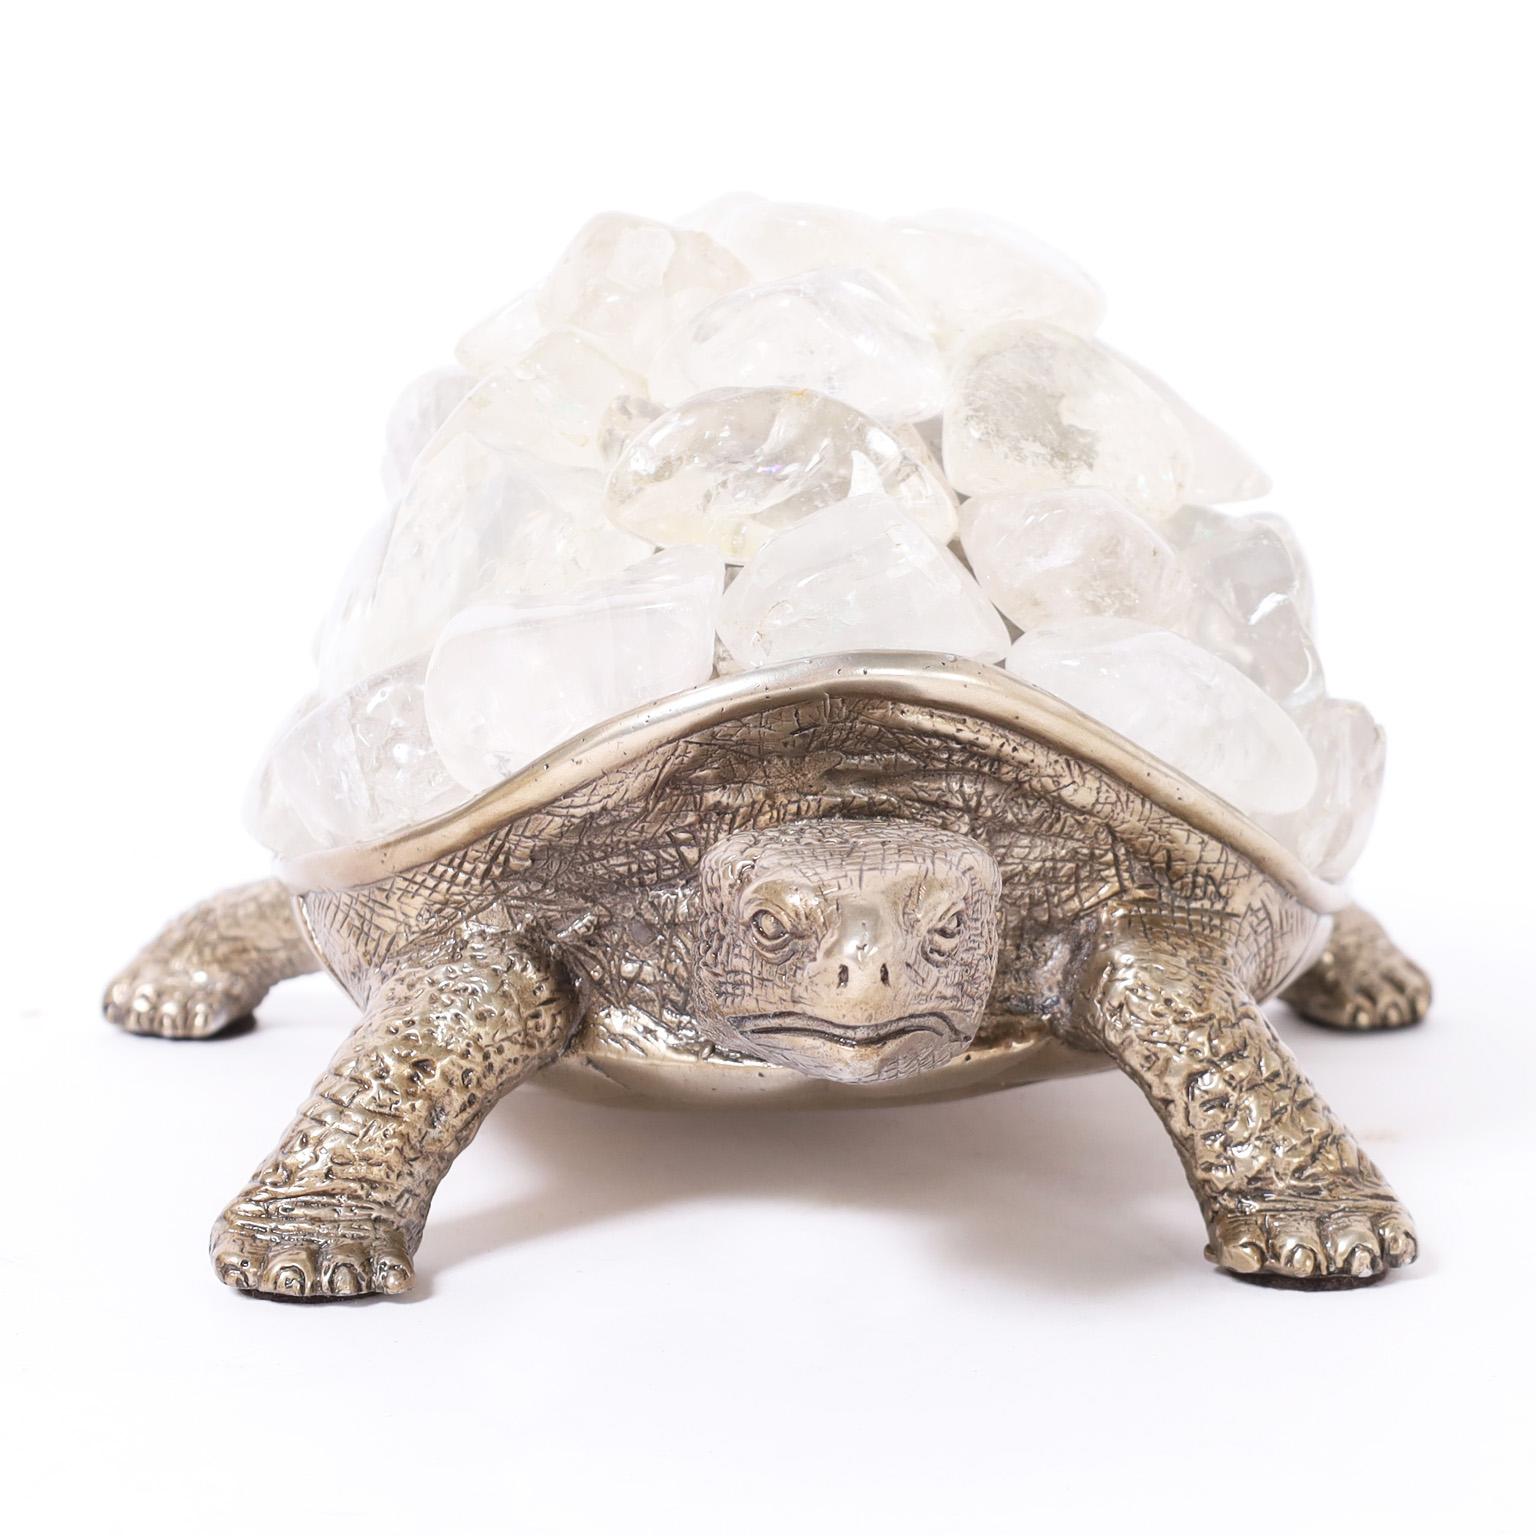 Silver Plate Turtle with Crystal Rocks - Victorian Sculpture by Unknown